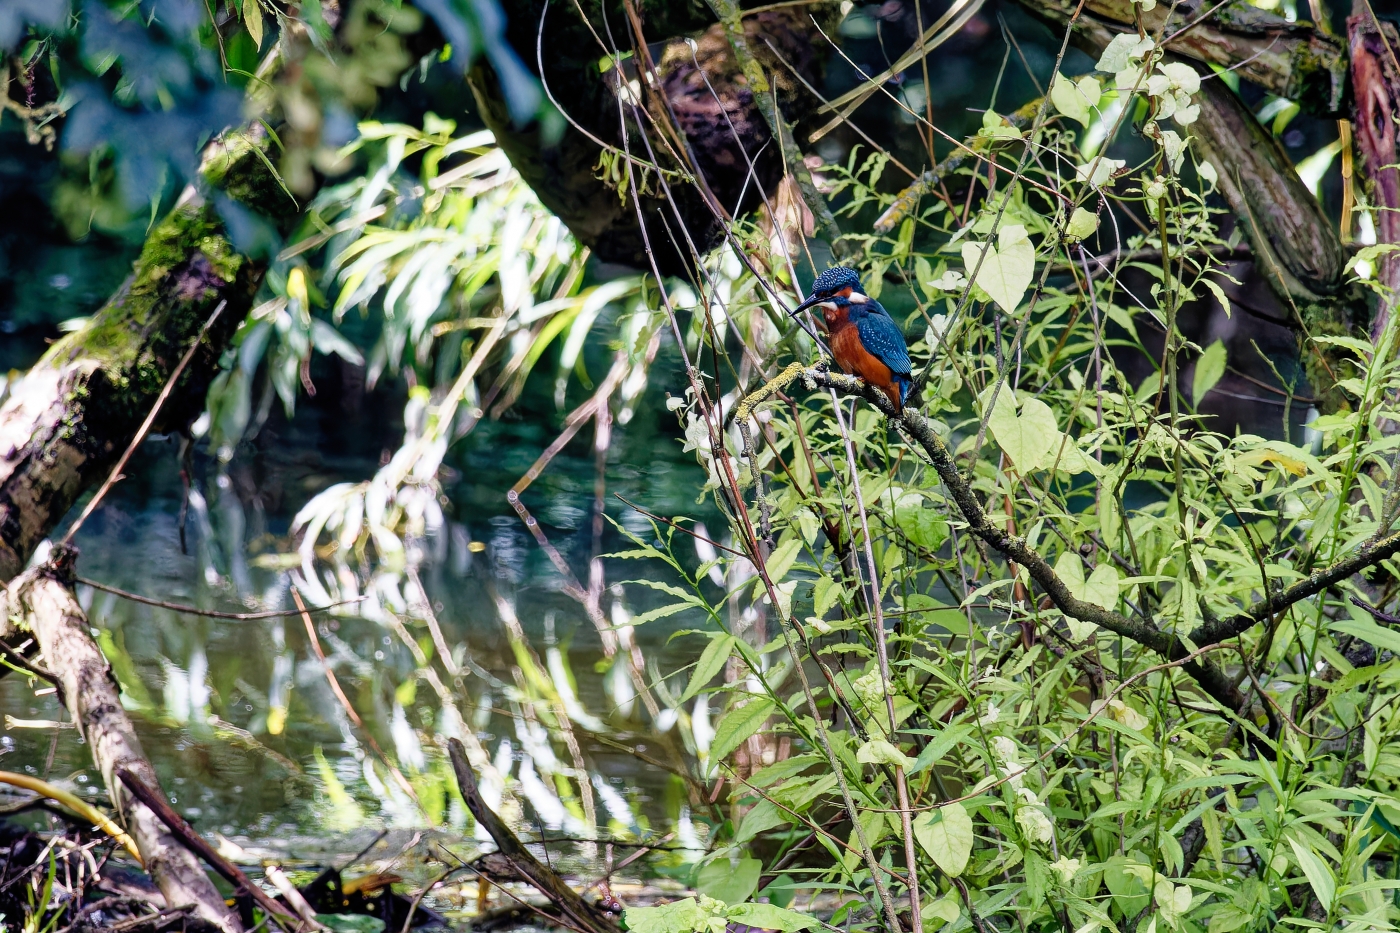 photographer dntphotographs wildlife  photo. kingfisher perched waiting for supper to swim passed.